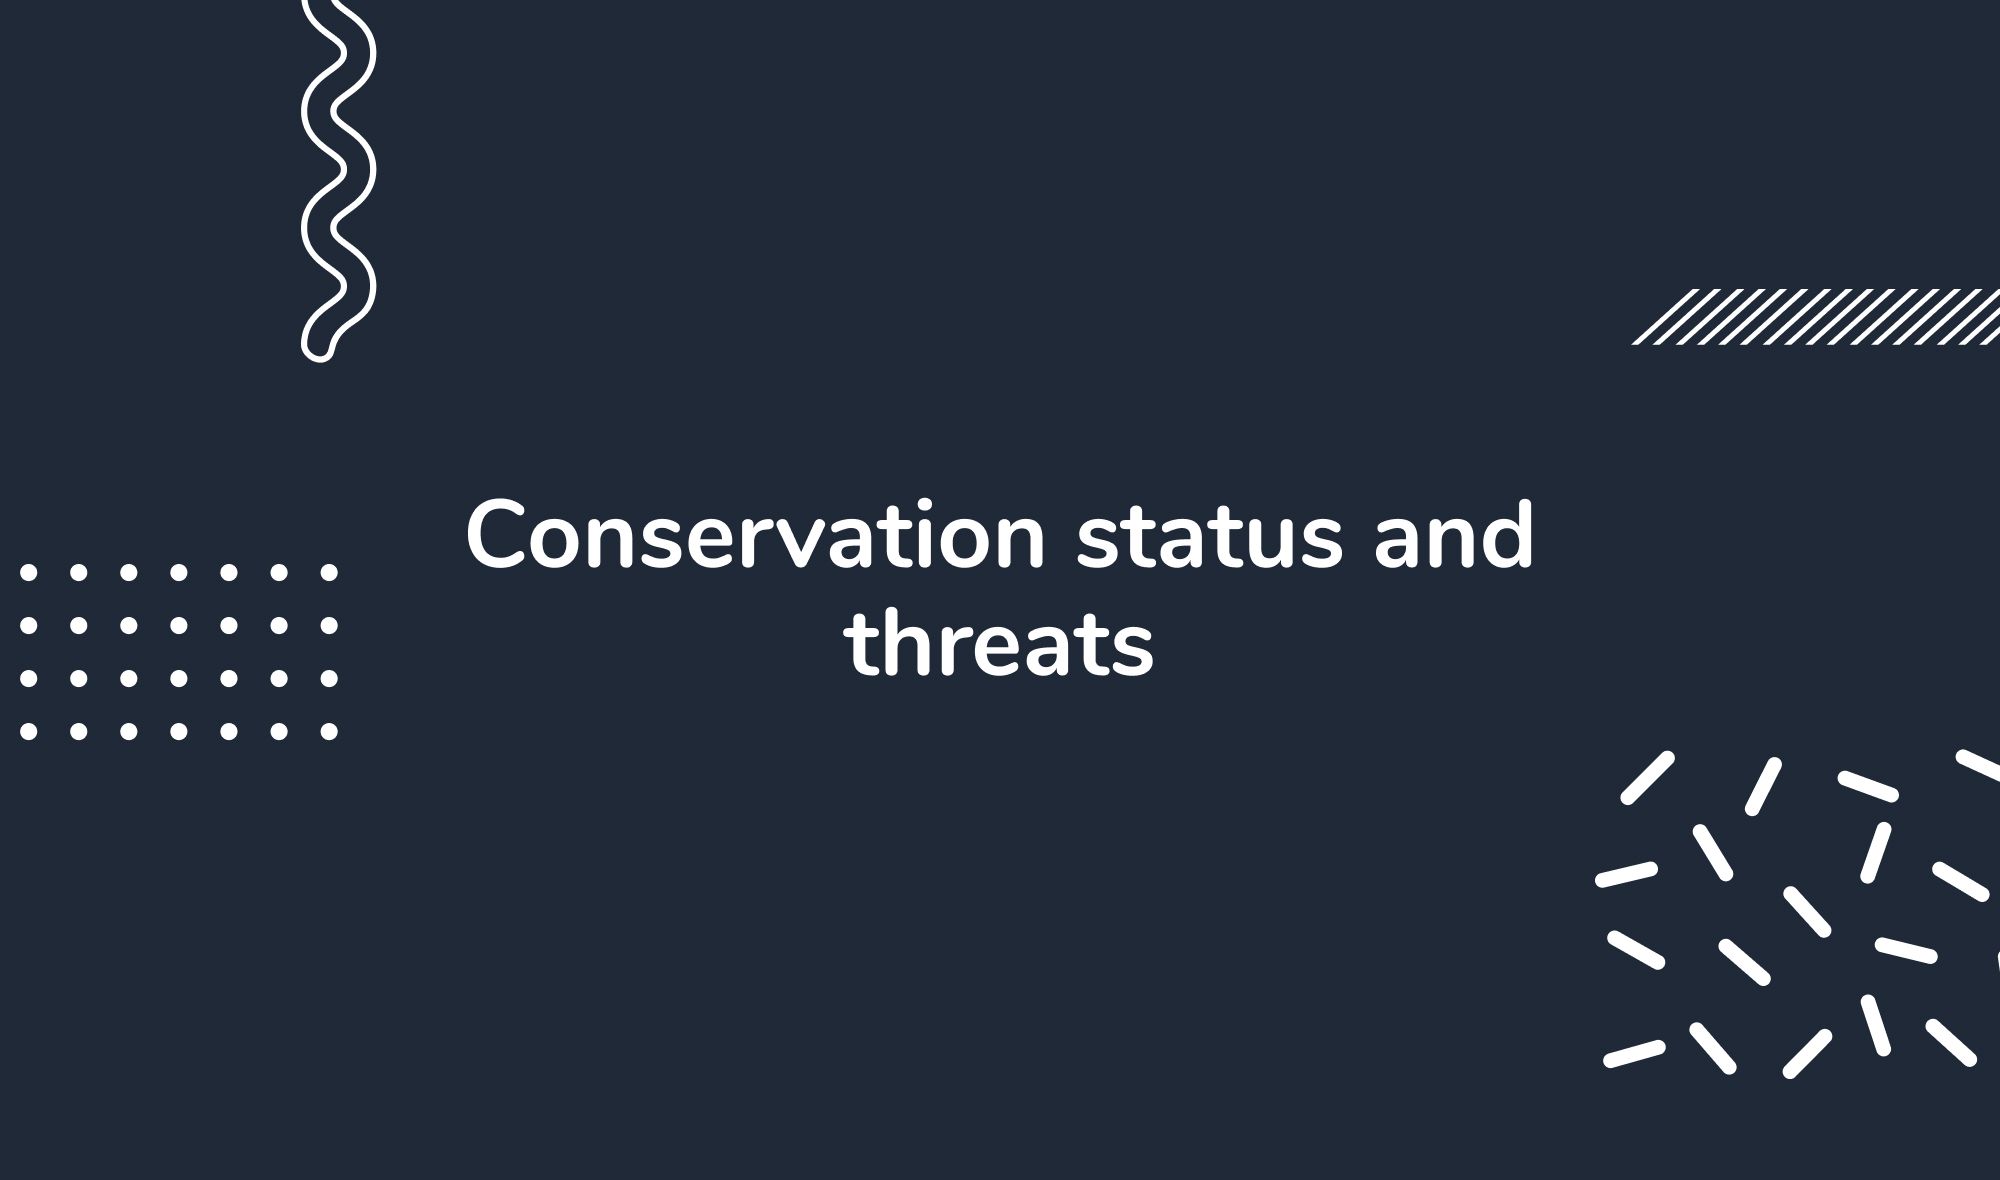 Conservation status and threats